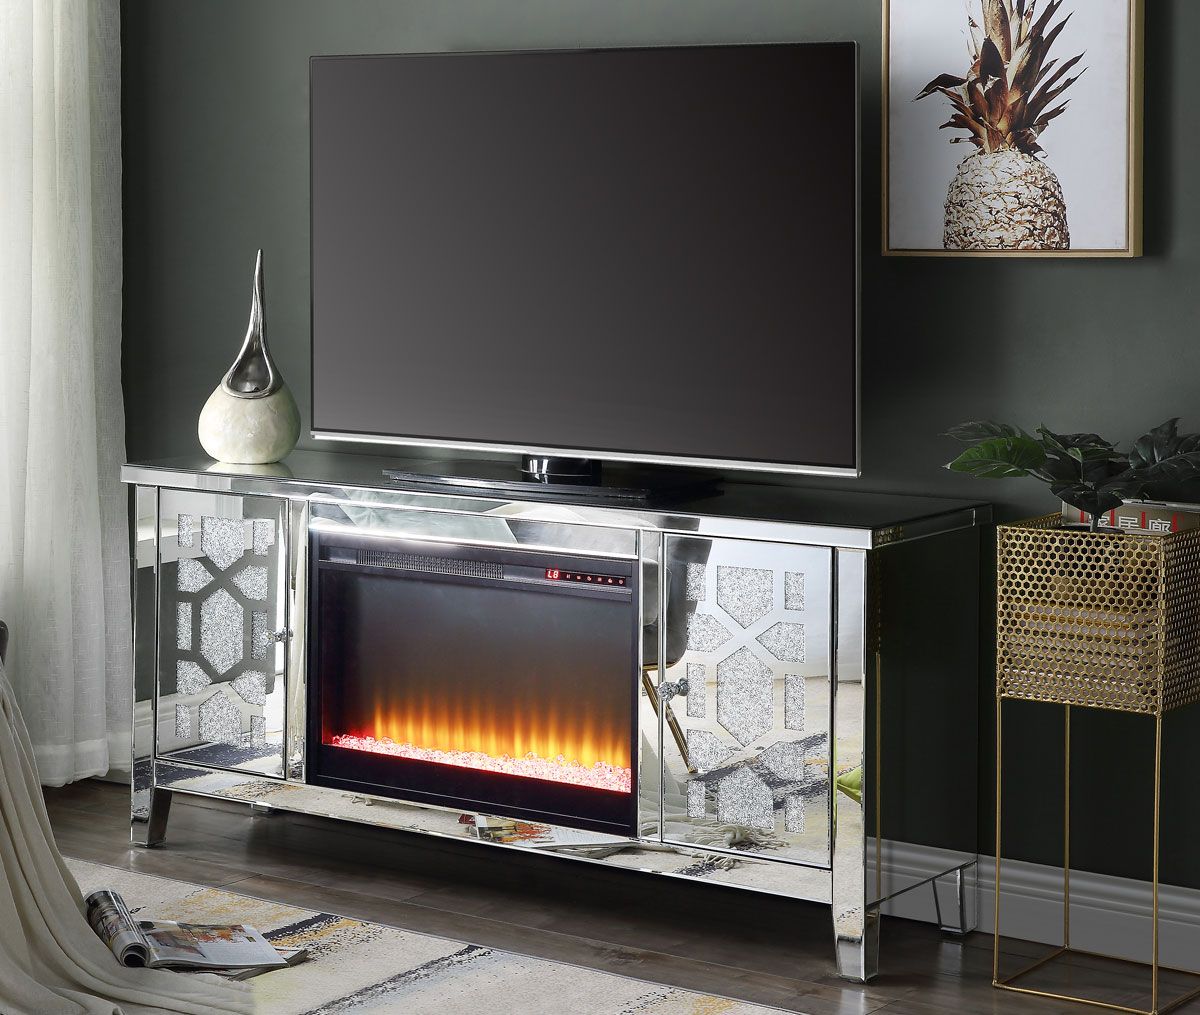 Bardic Mirrored TV Stand With Fireplace